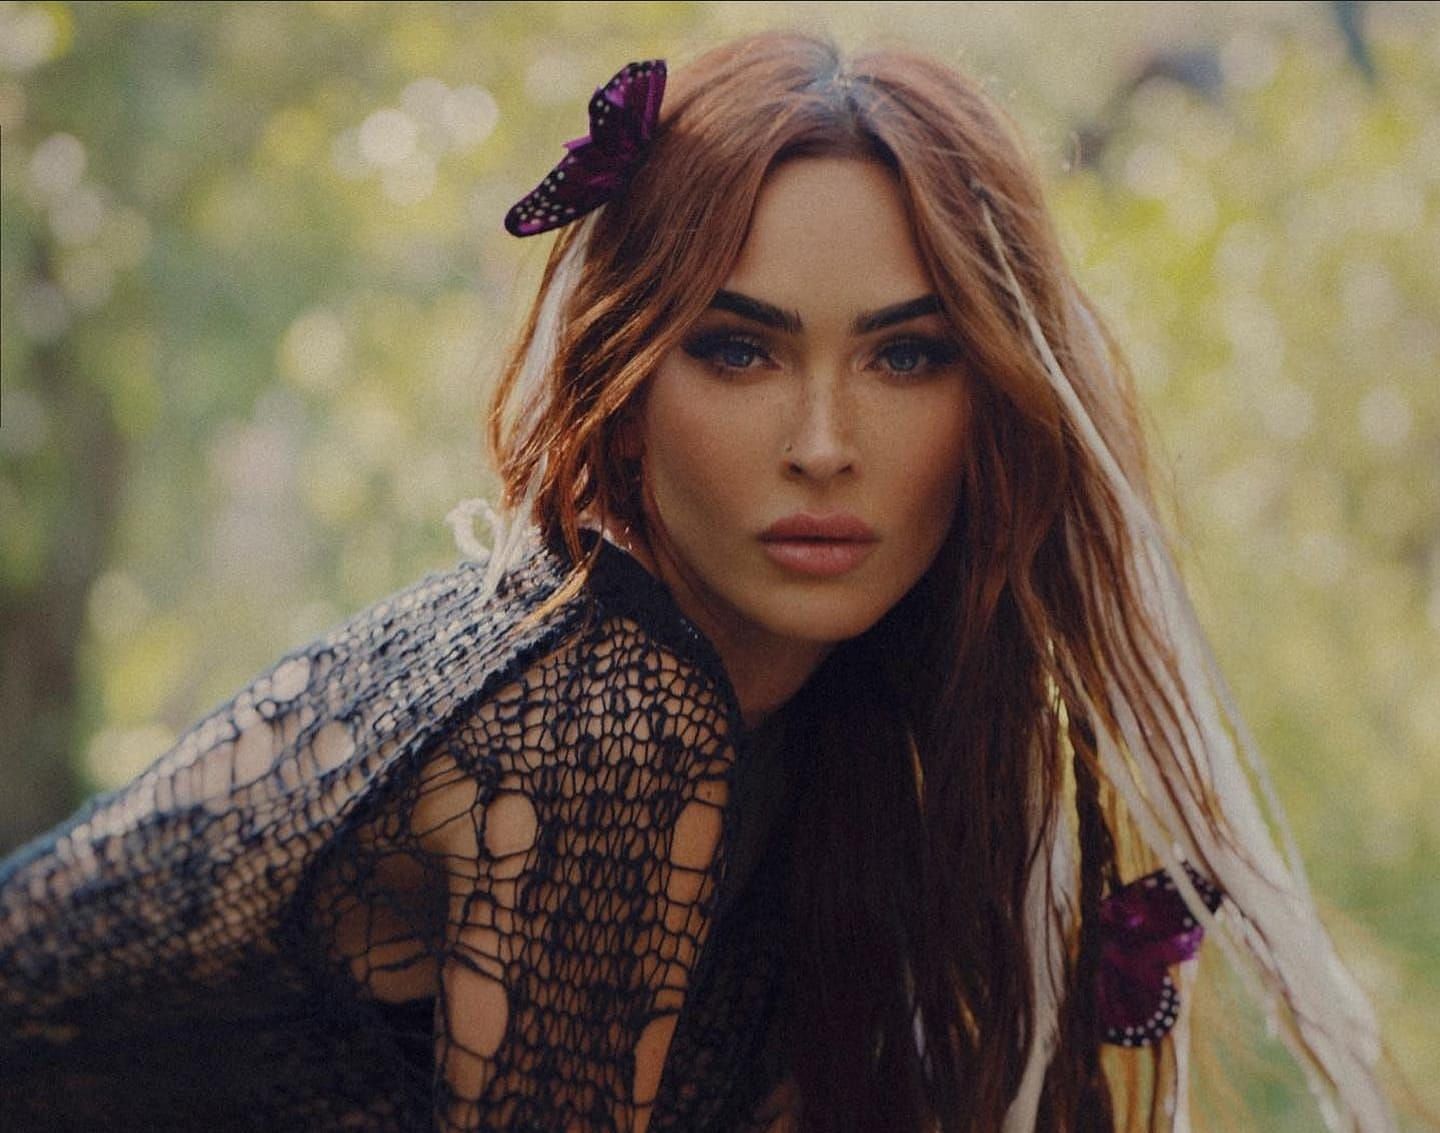 Source- Official Instagram page of Megan Fox